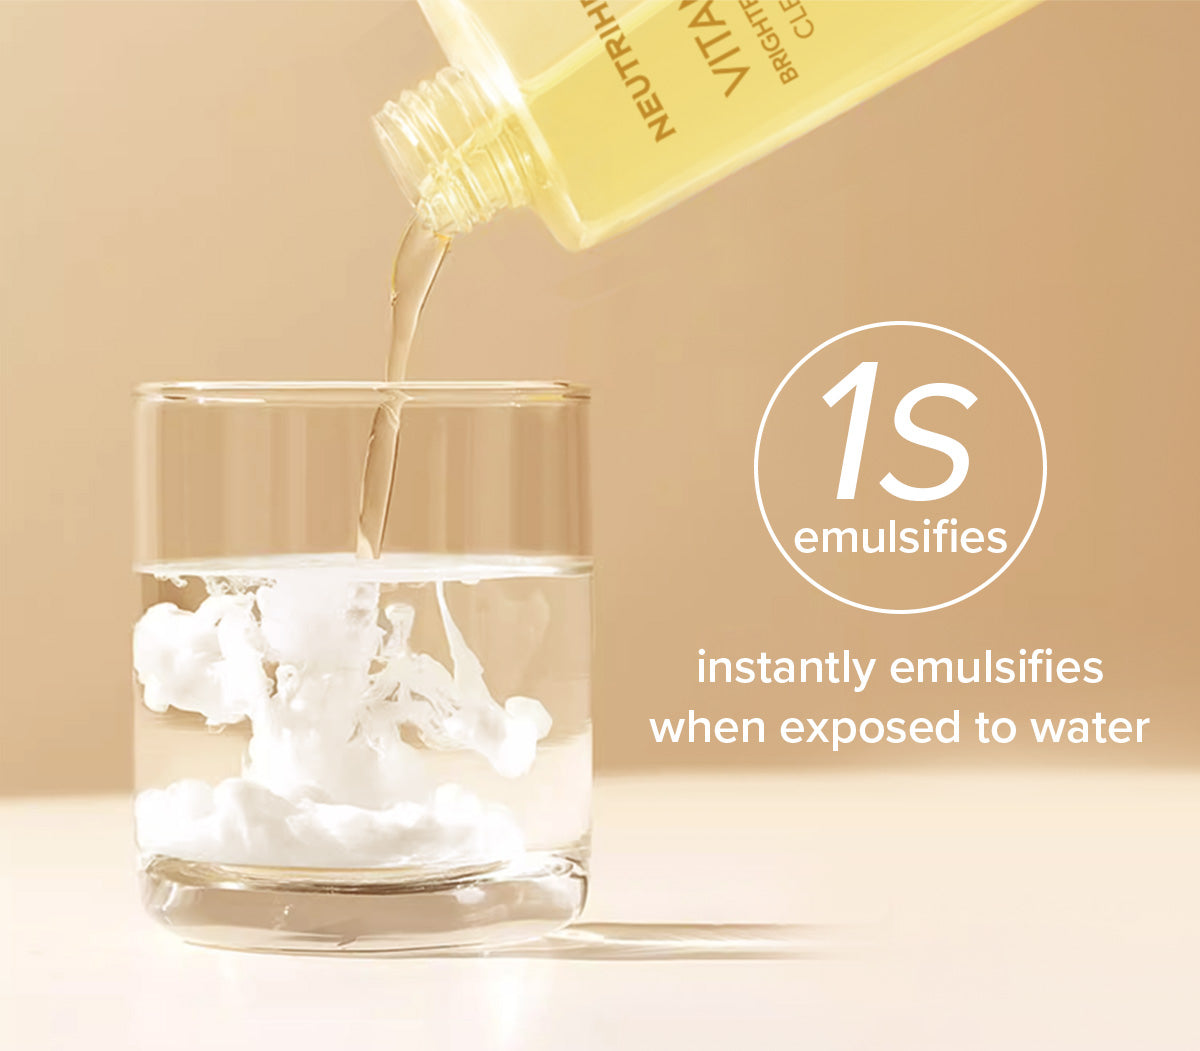 vitamin c cleansing oil 1s emulsifies, instantly emulsifies when exposed to water